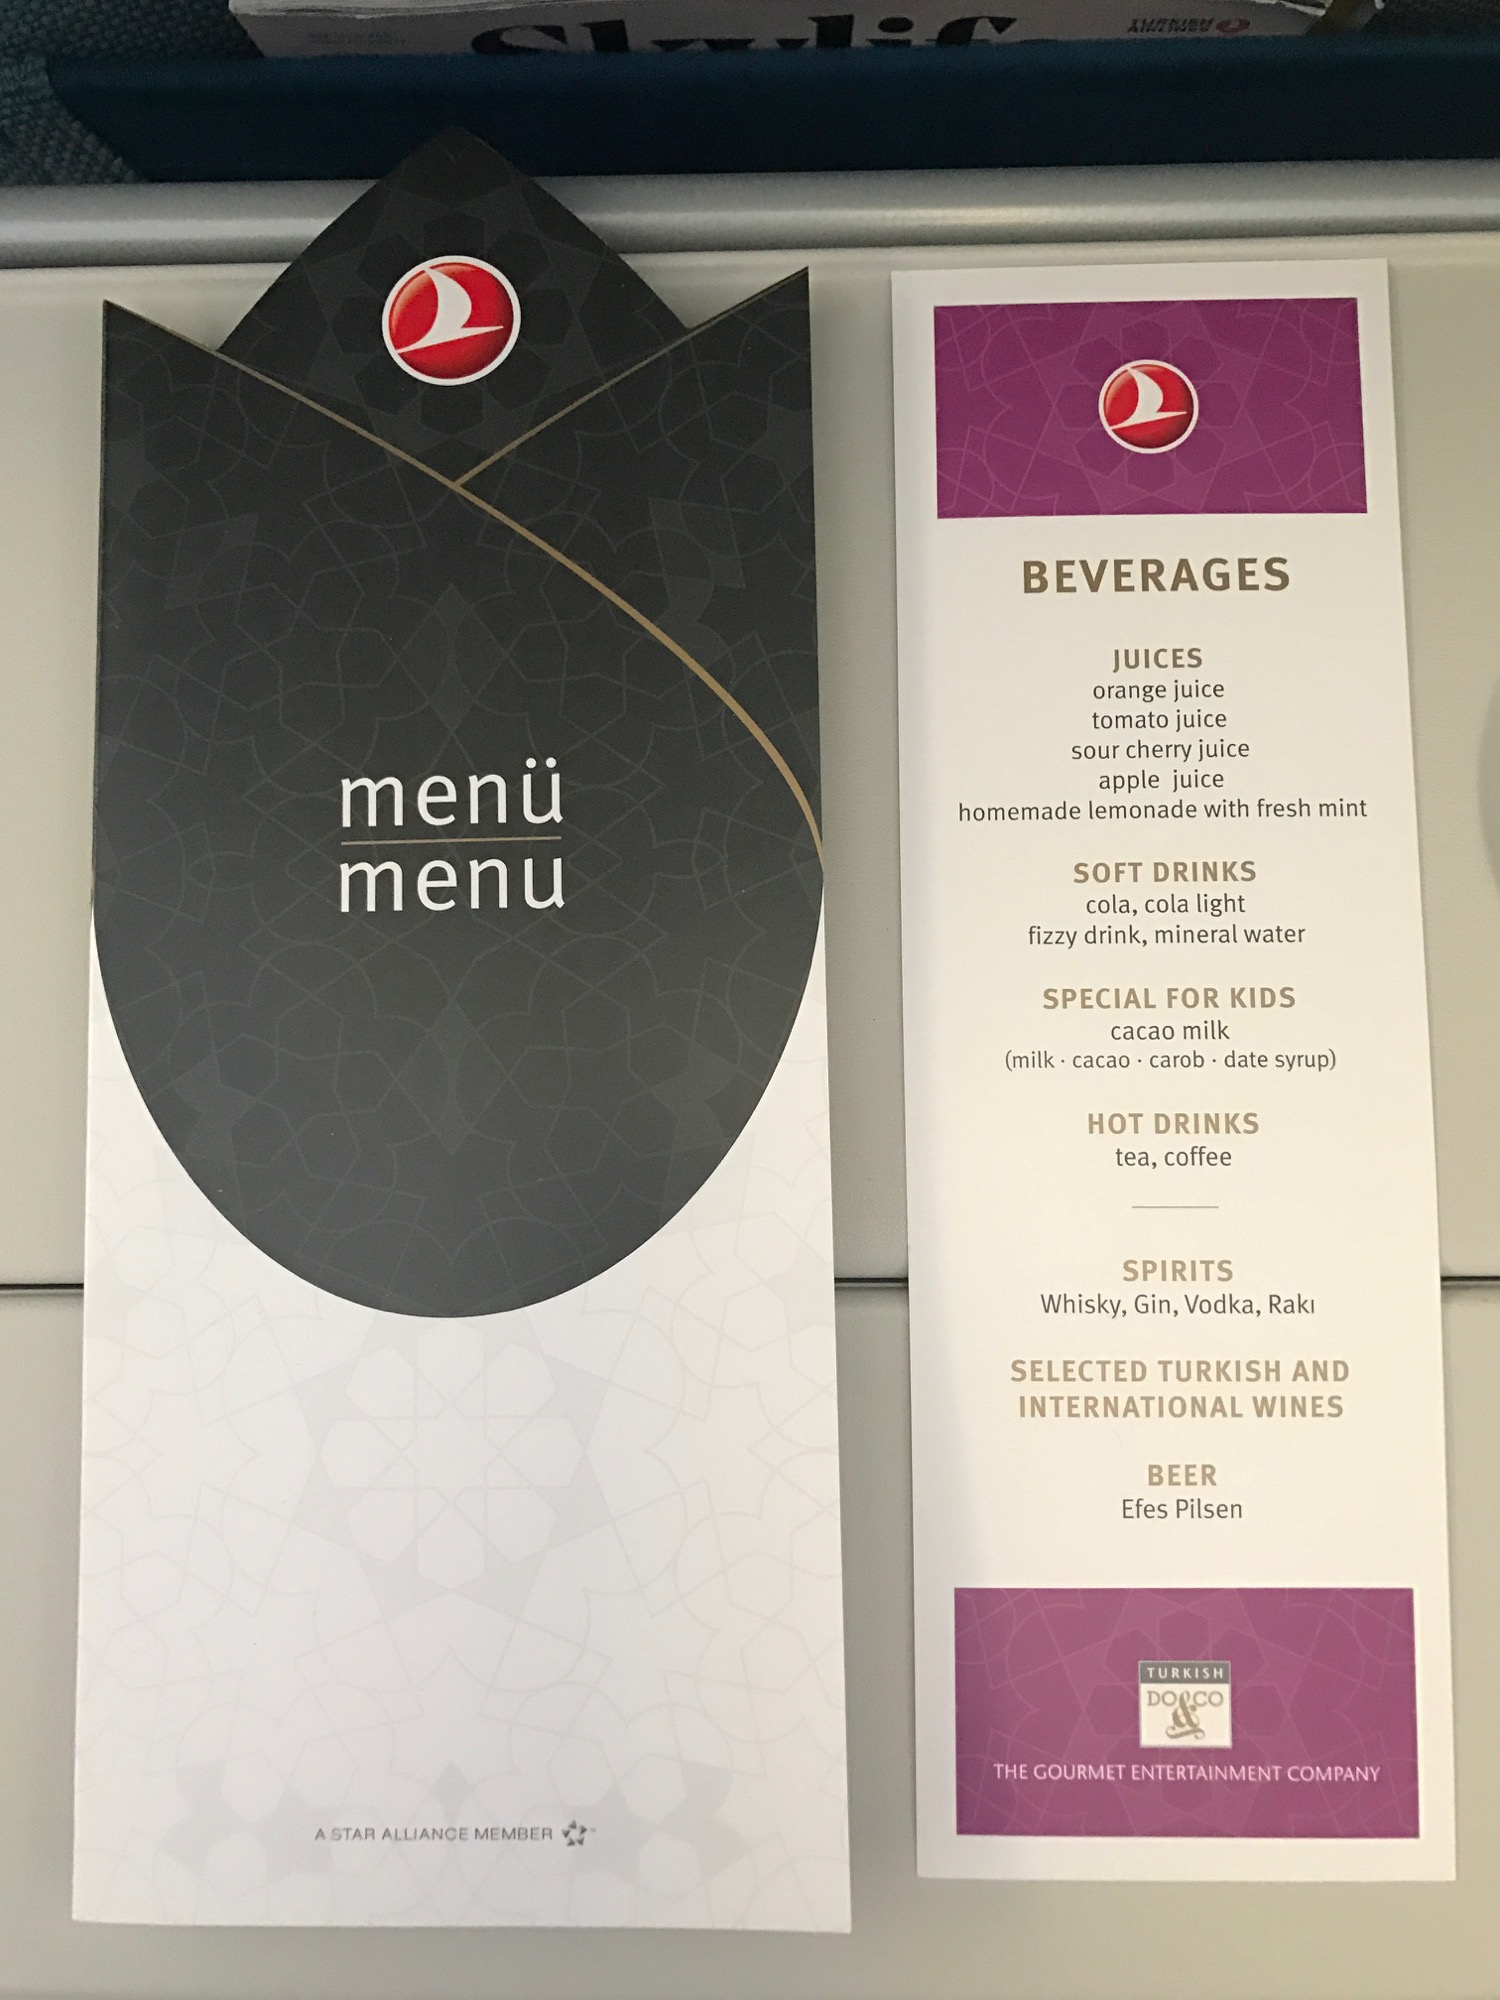 Turkish Airlines Economy Class Meals - 1